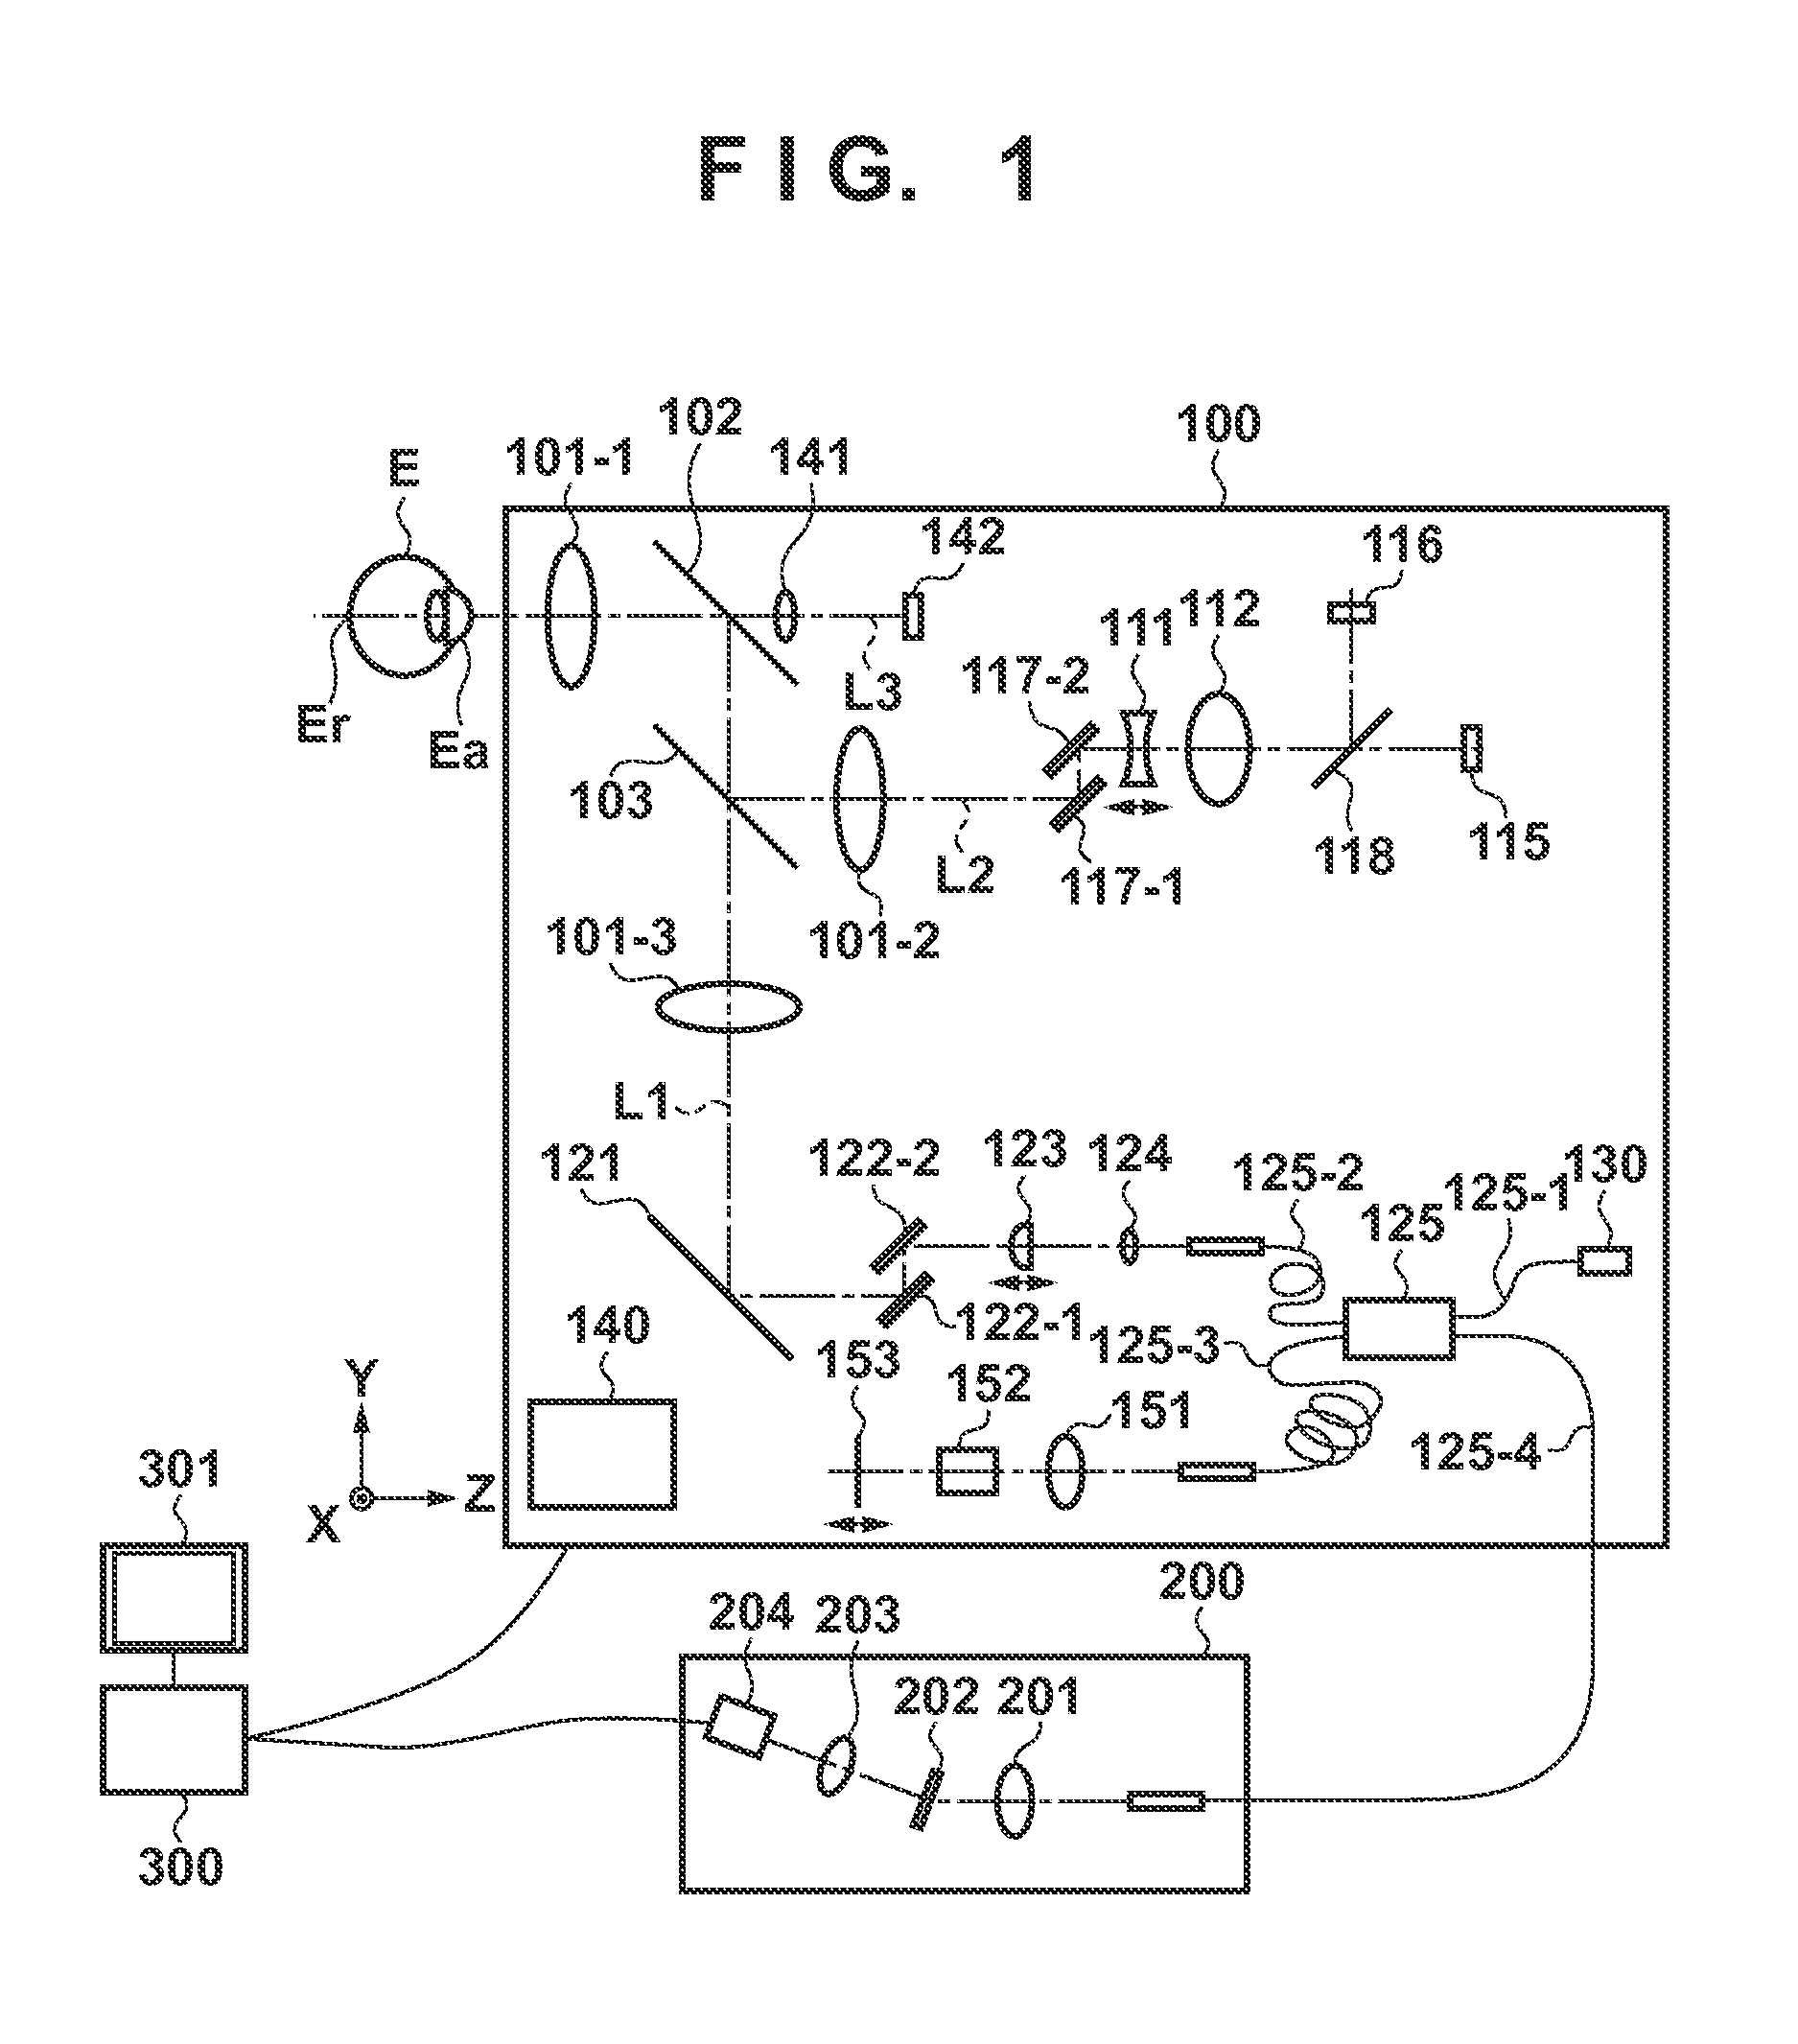 Ophthalmic apparatus, method of controlling ophthalmic apparatus and storage medium